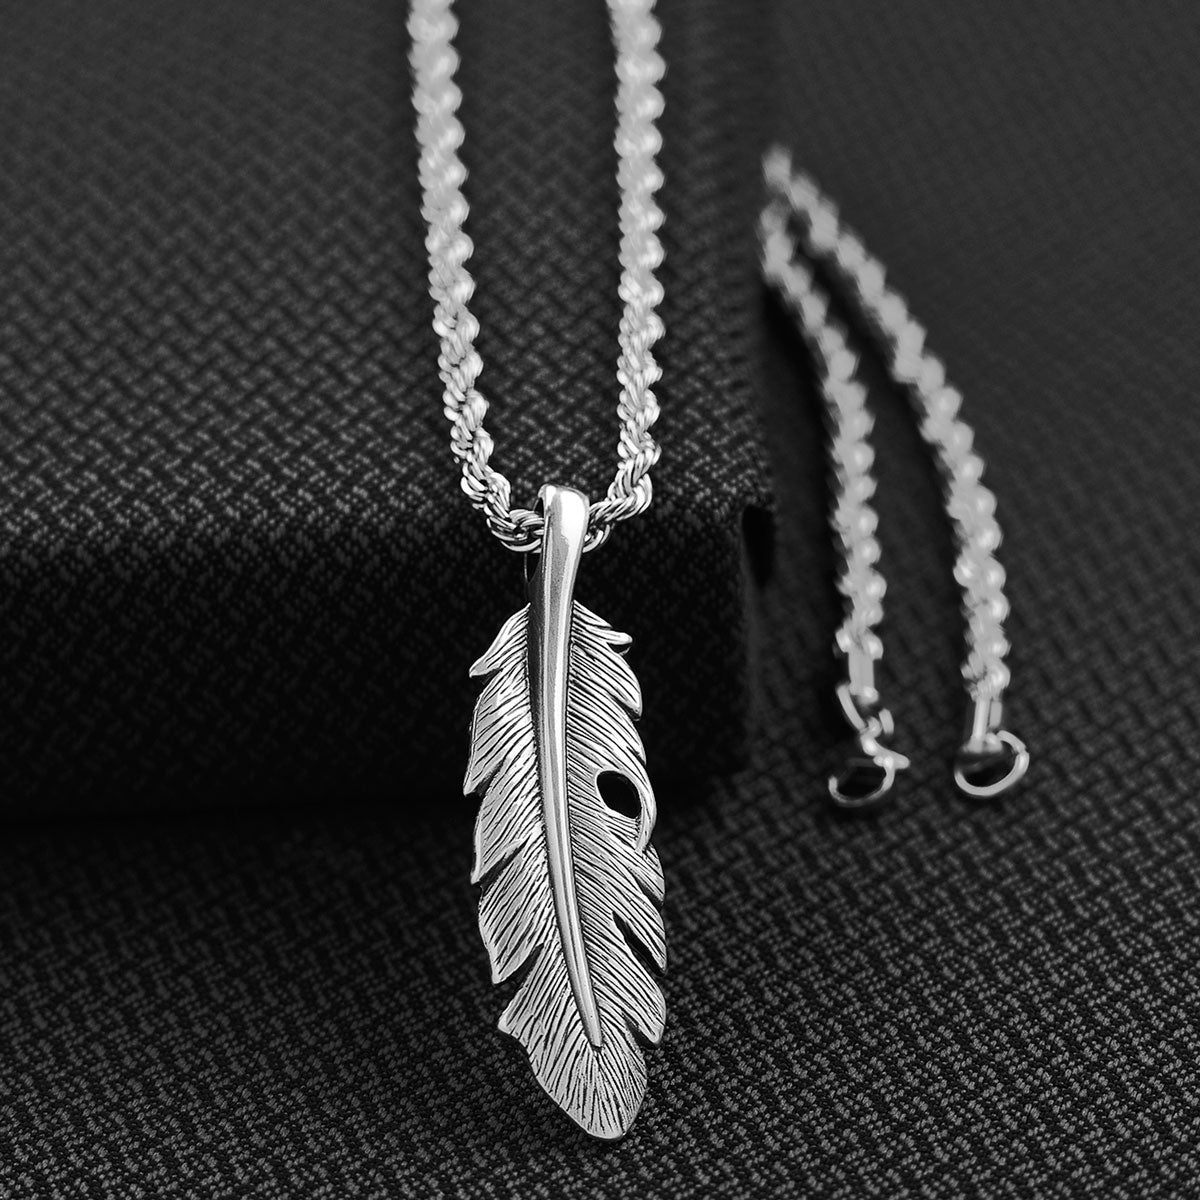 Twister Men's Chain Necklace - Silver Feather